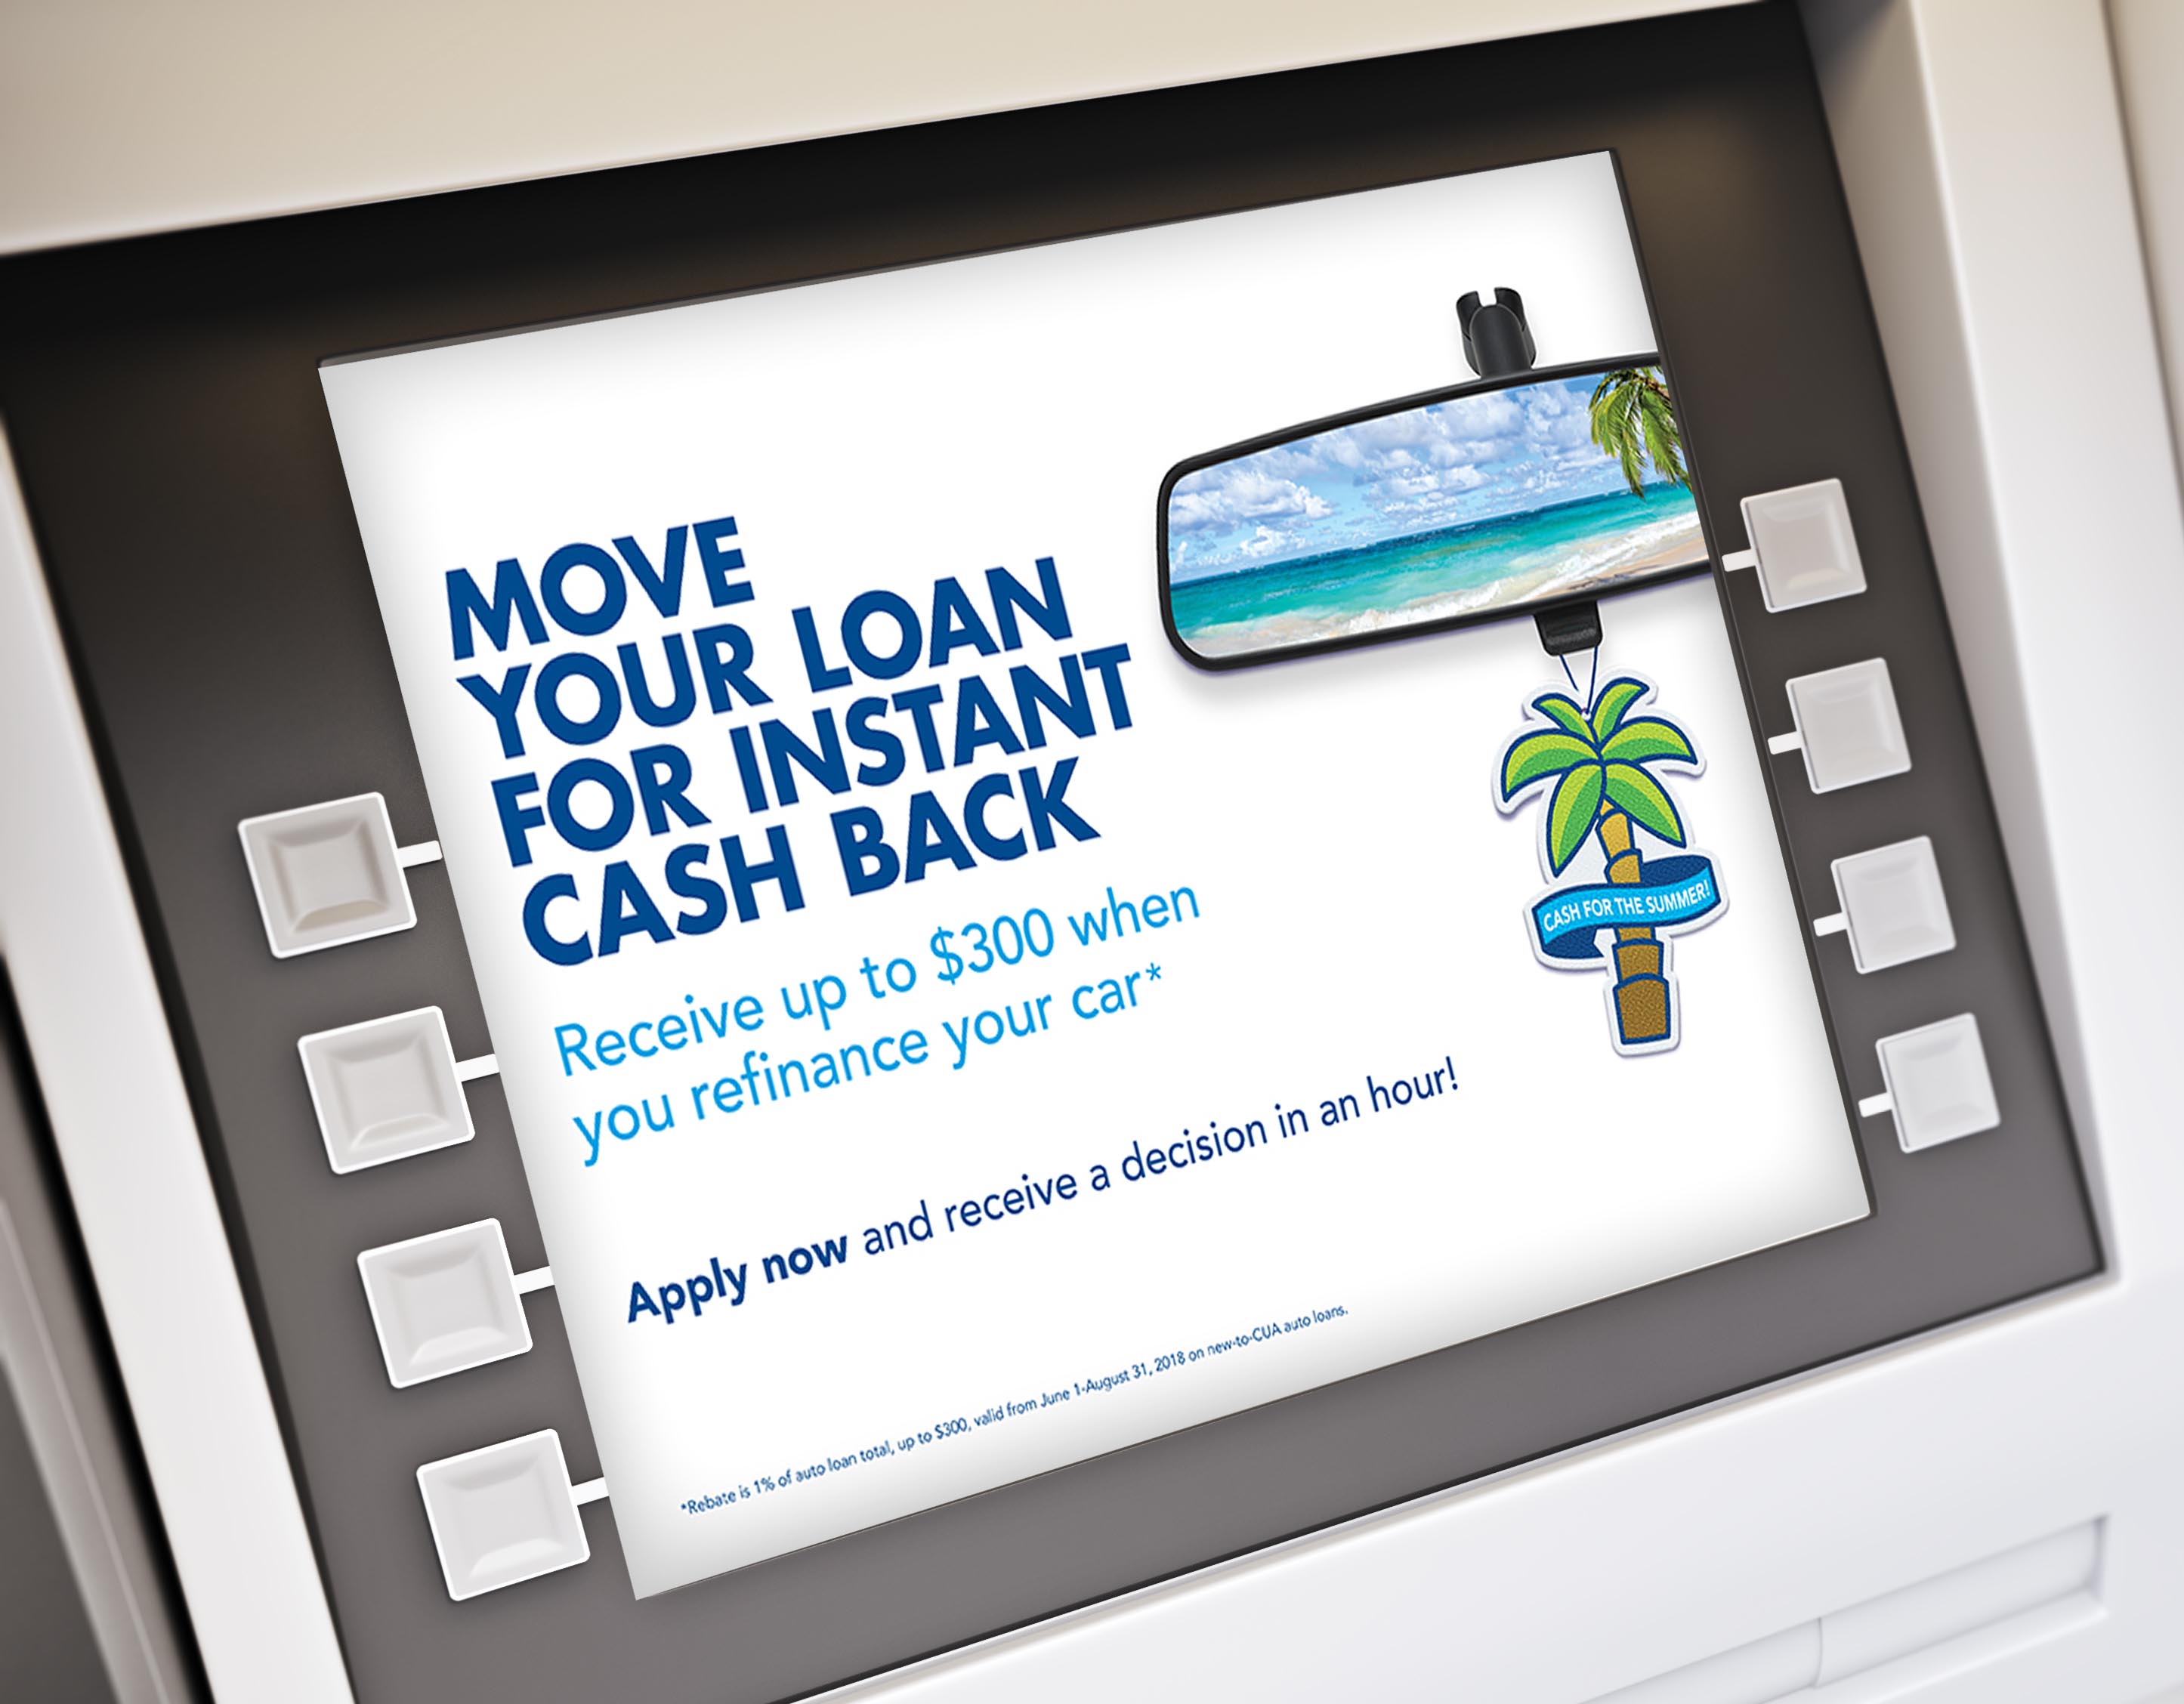 credit union summer campaign on atm screen